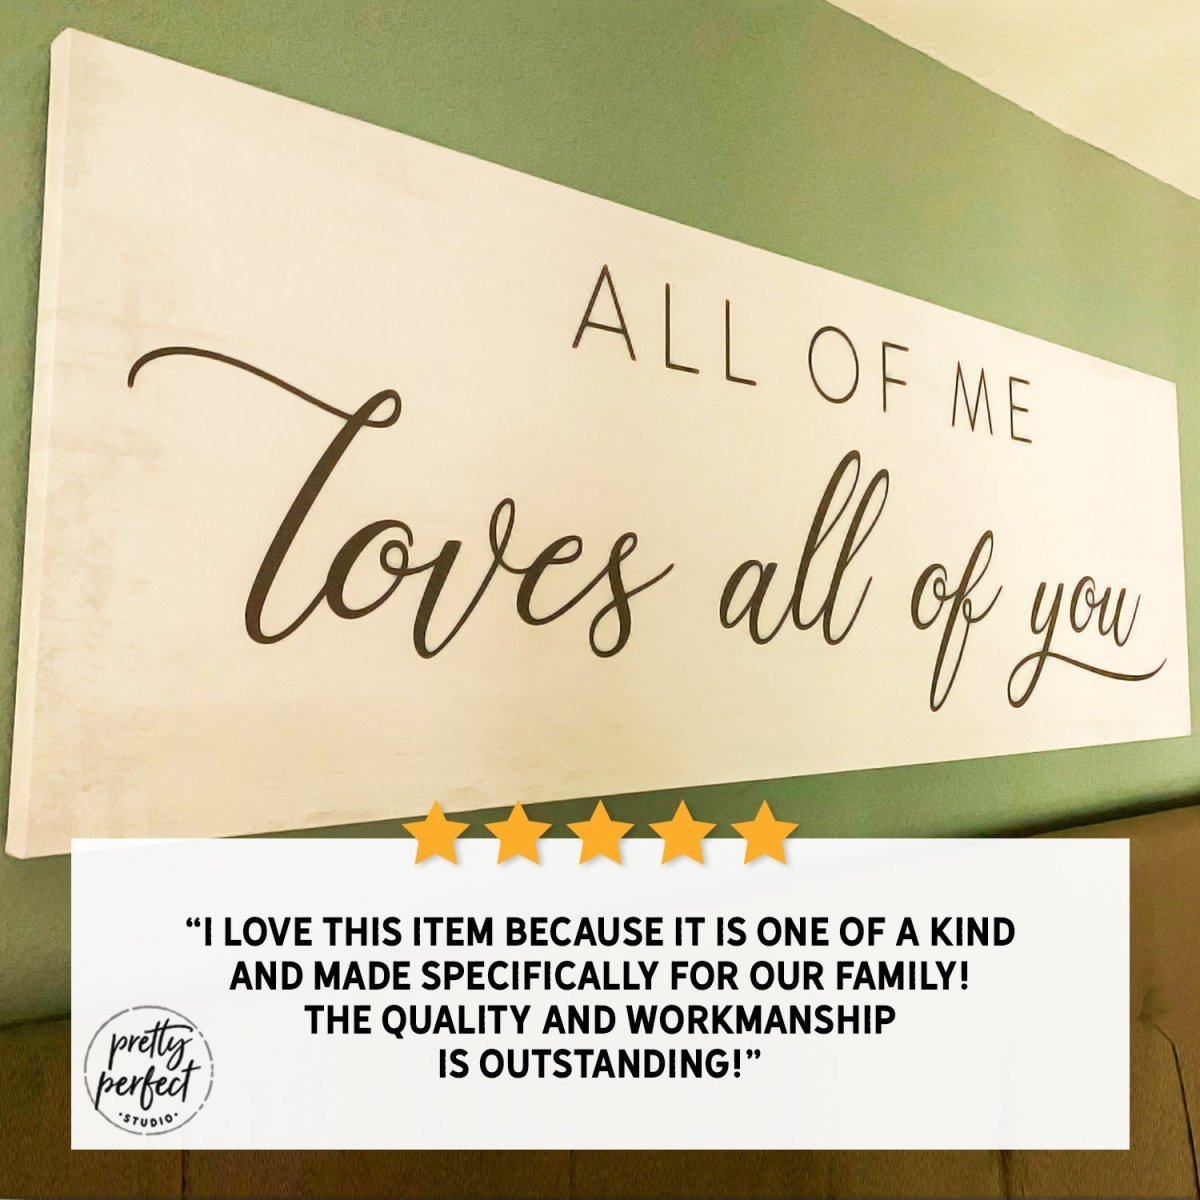 Customer product review for all of me loves all of you sign by Pretty Perfect Studio